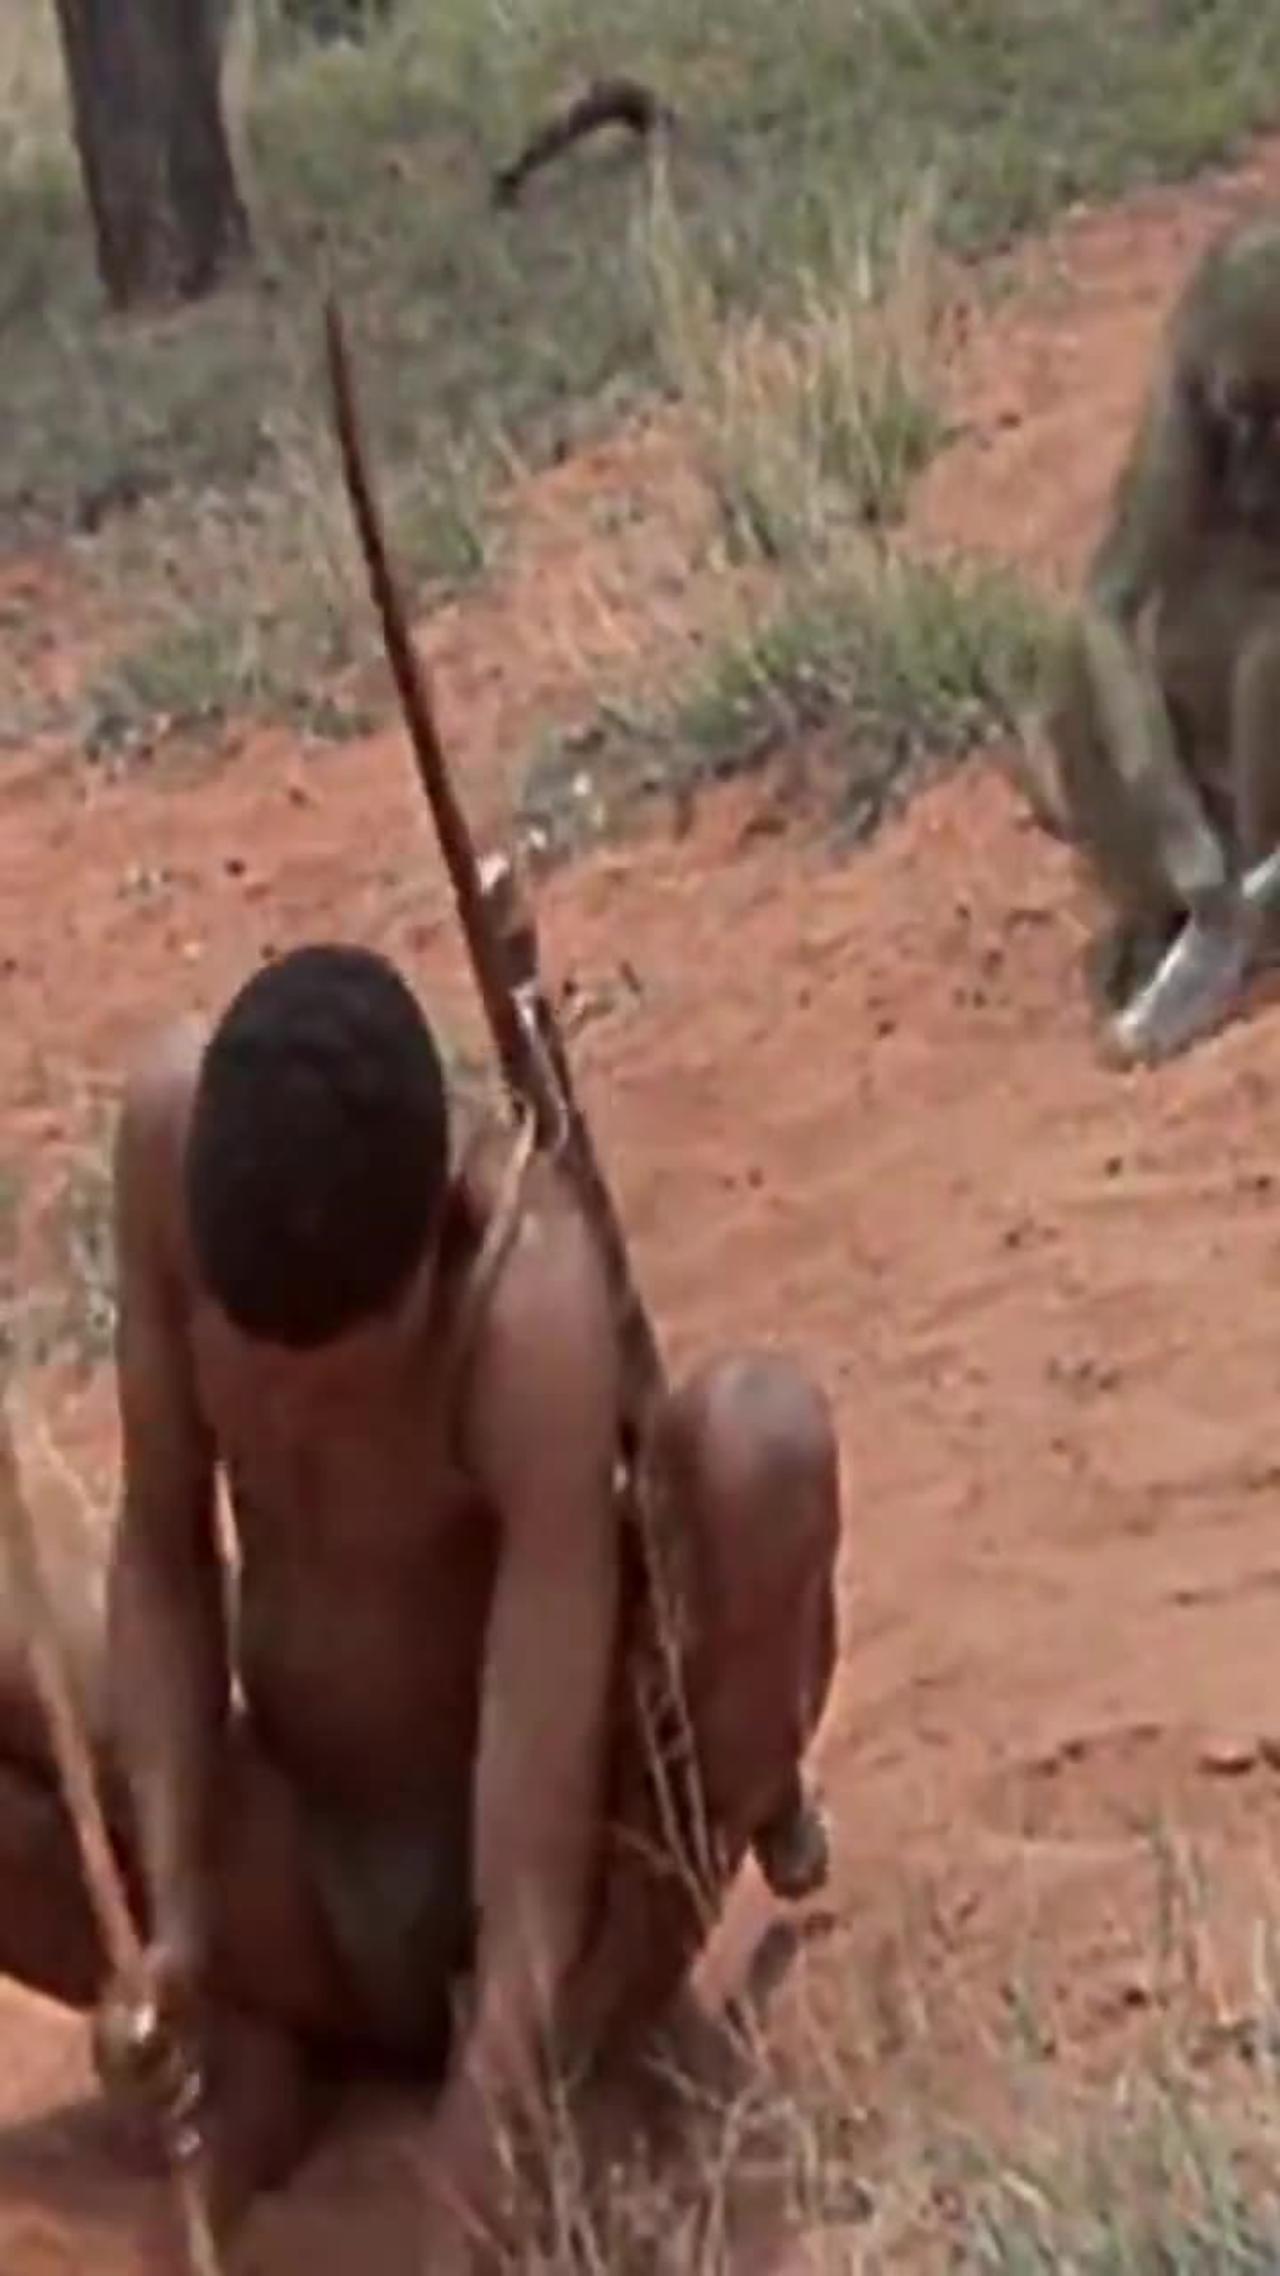 How to get thing from - baboon back - bushman - kalhari